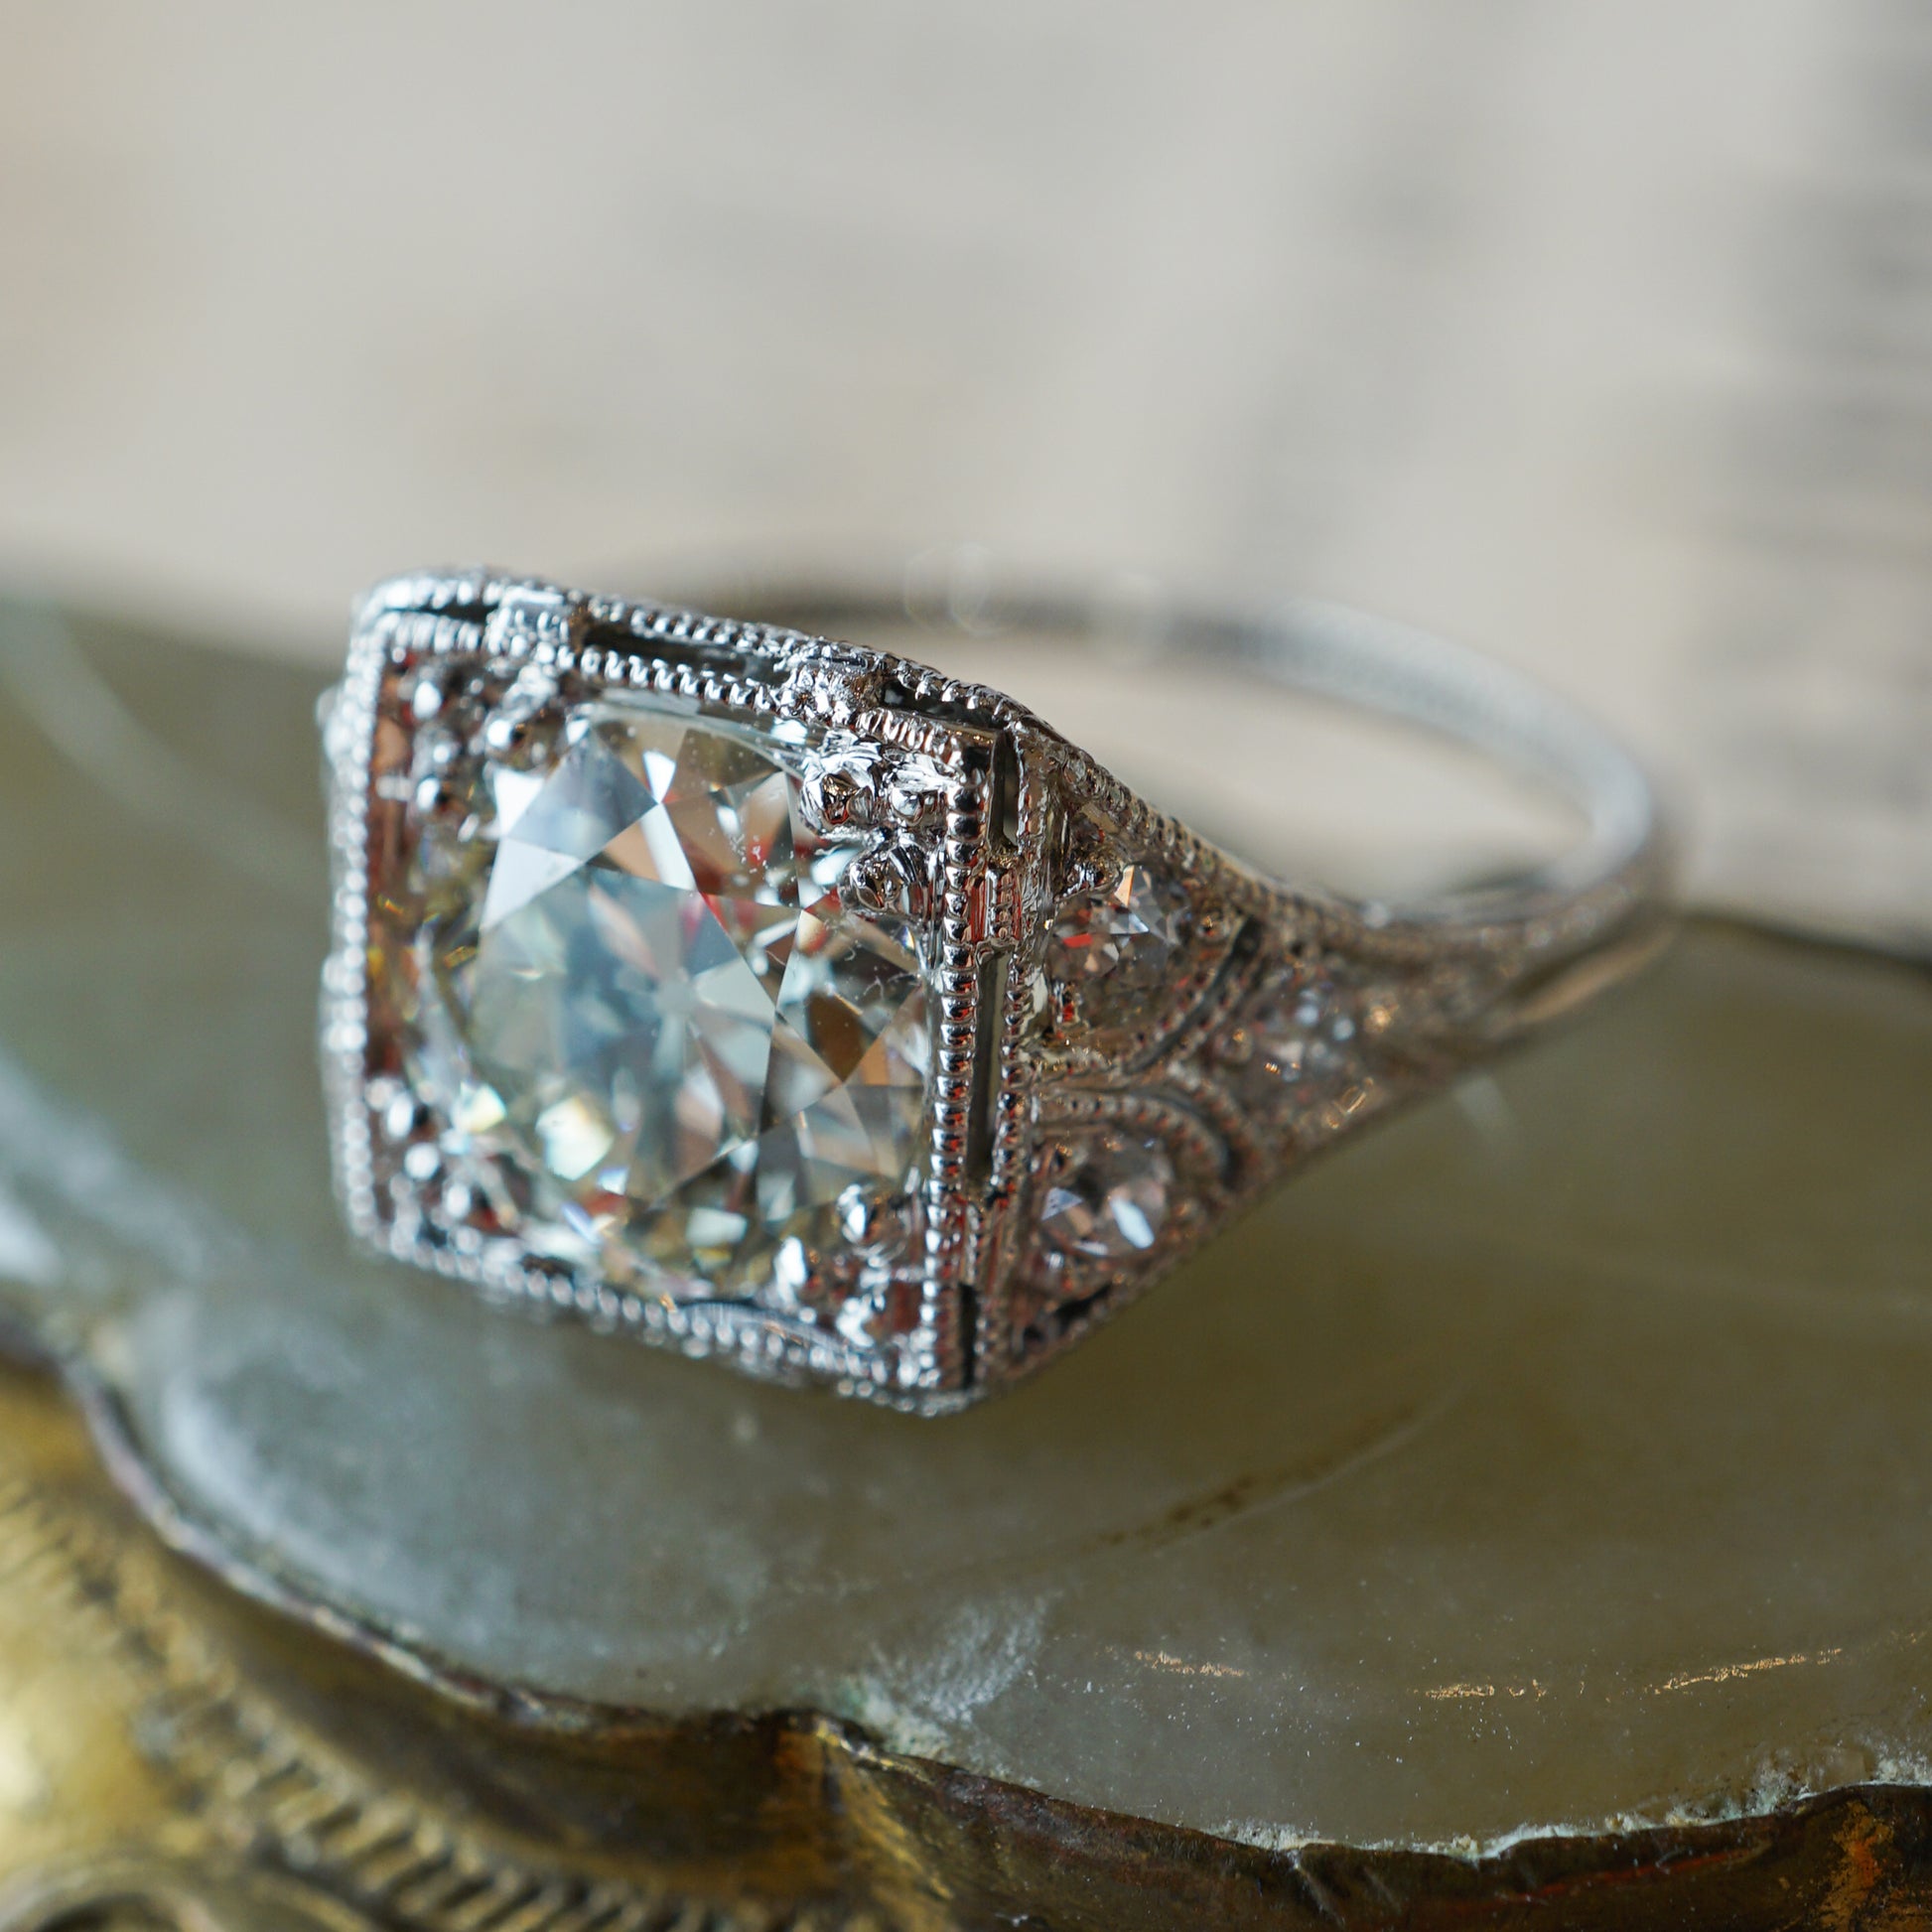 1.57 Antique Art Deco Diamond Engagement Ring in PlatinumComposition: PlatinumRing Size: 5.75Total Diamond Weight: 1.75 ctTotal Gram Weight: 3.5 g